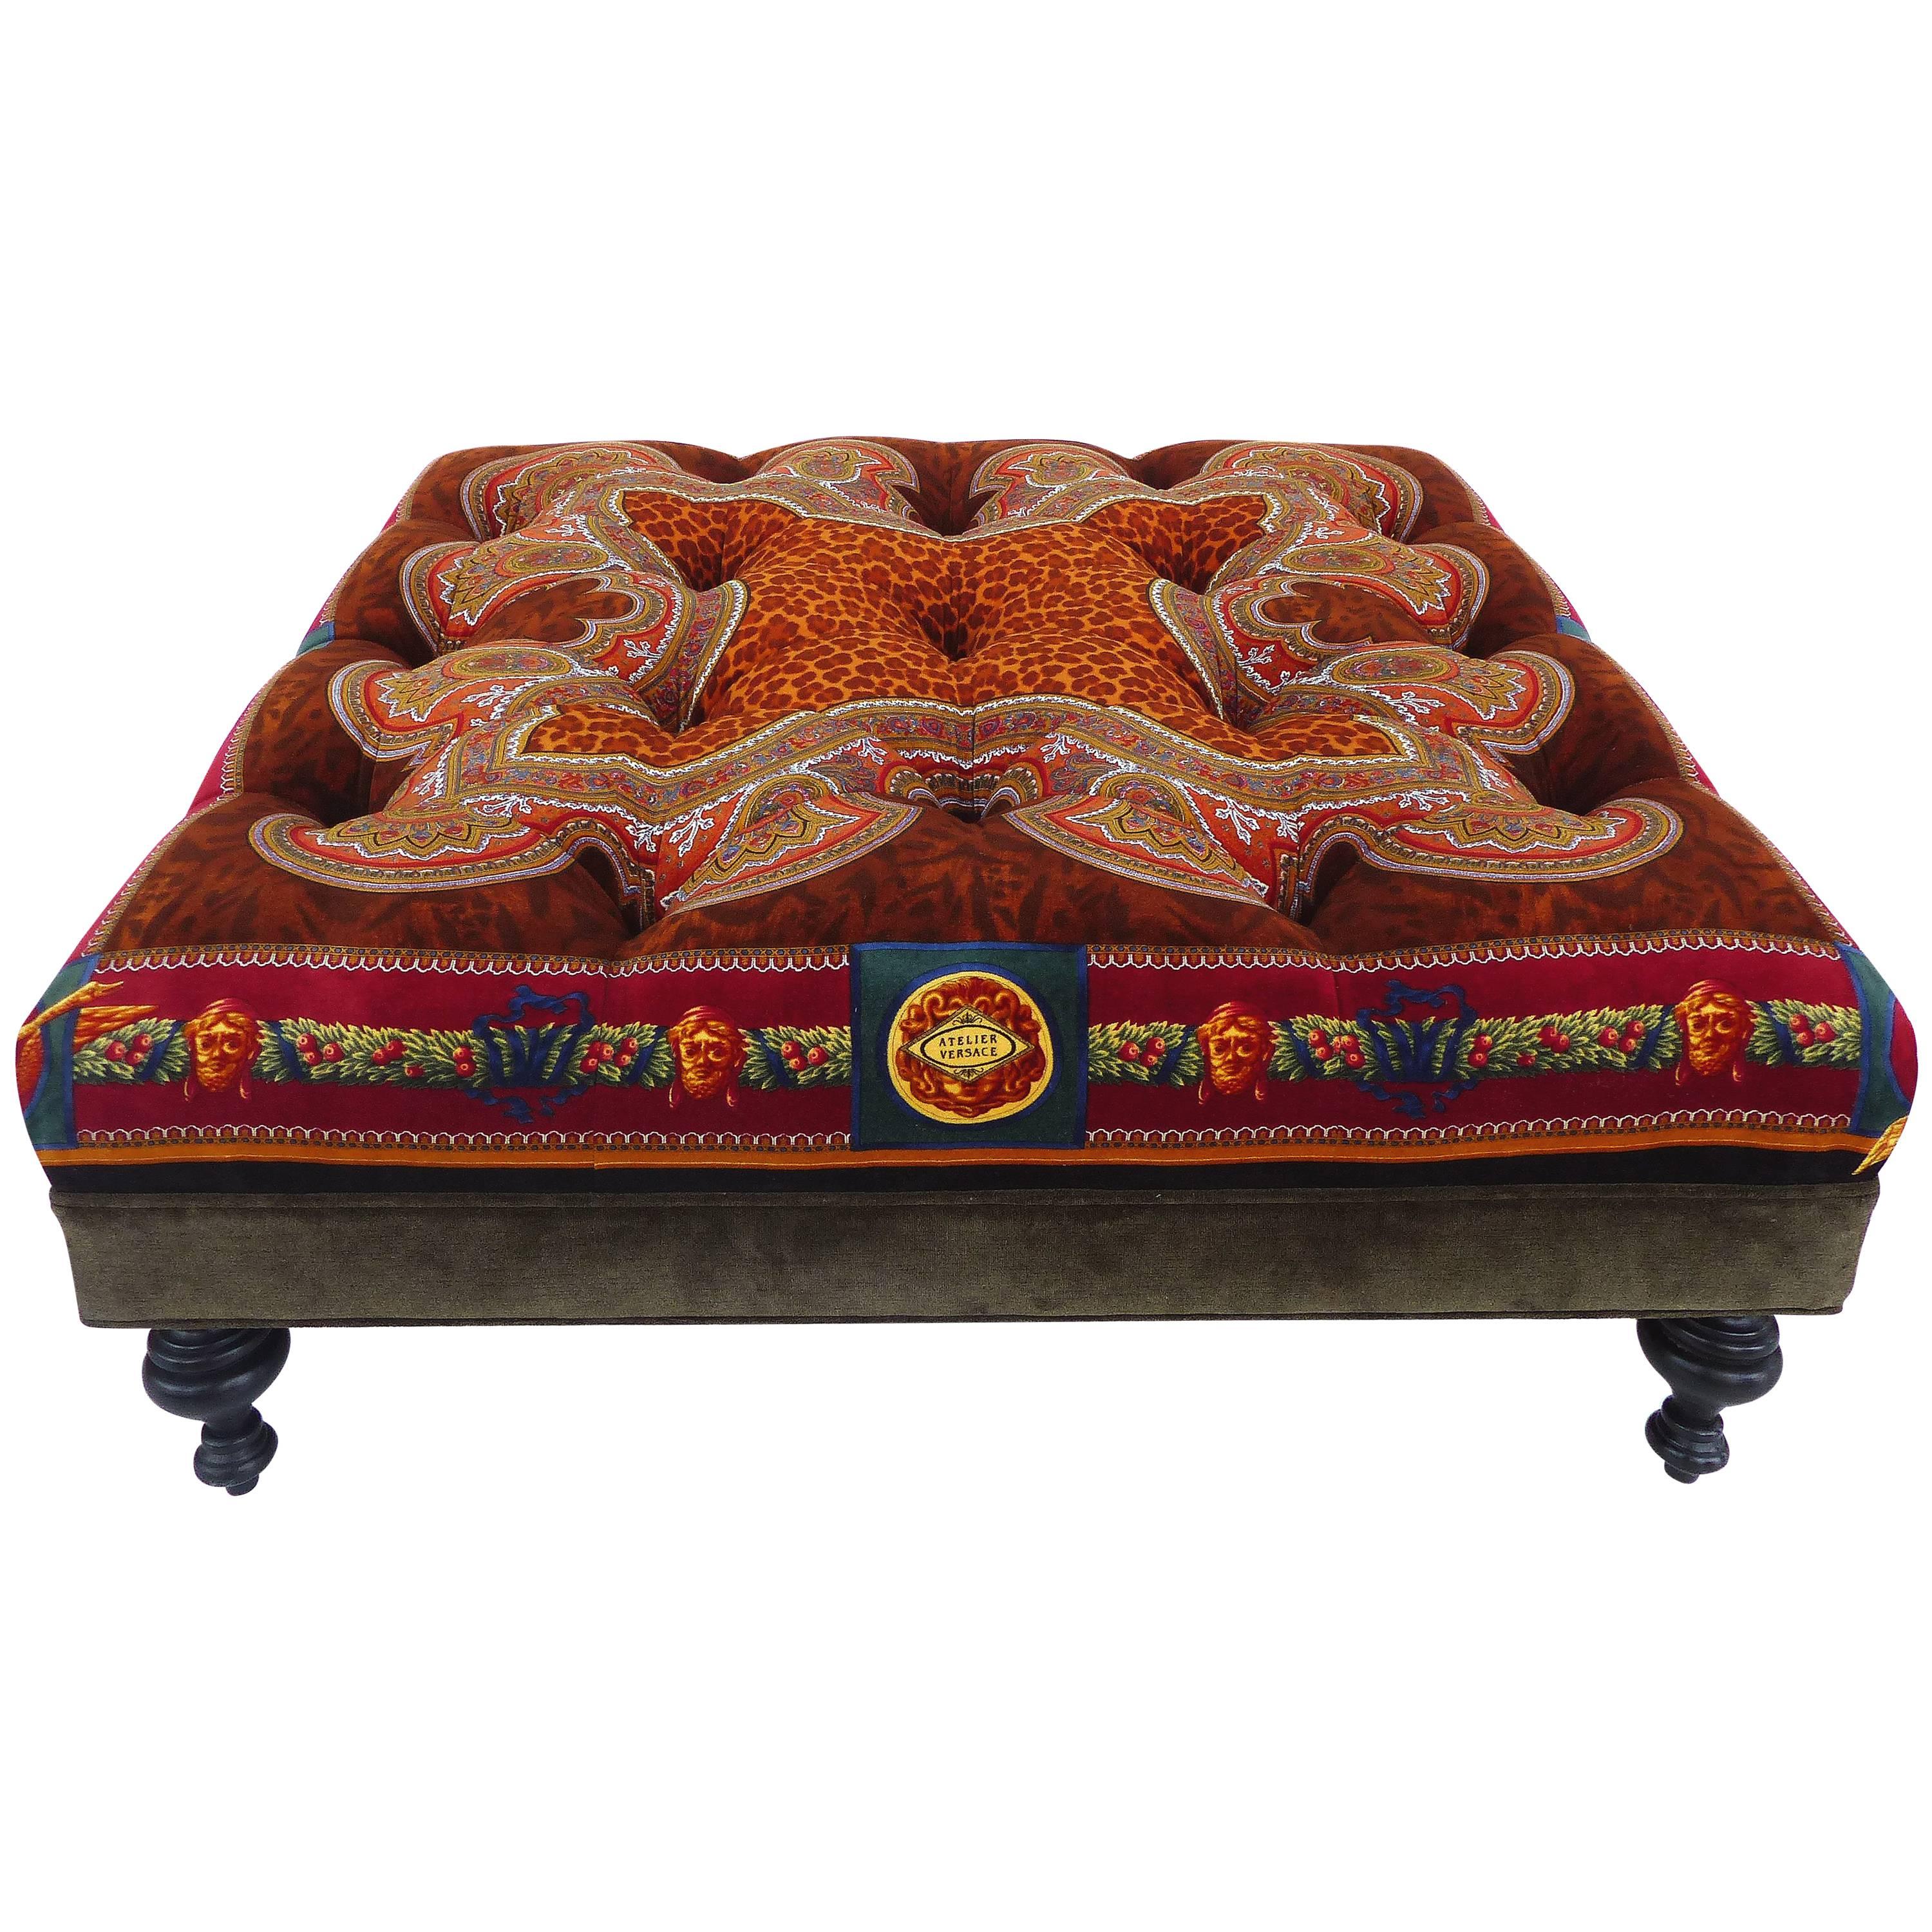 Rare Atelier Versace Tufted Upholstered Square Bench Ottoman Coffee Table